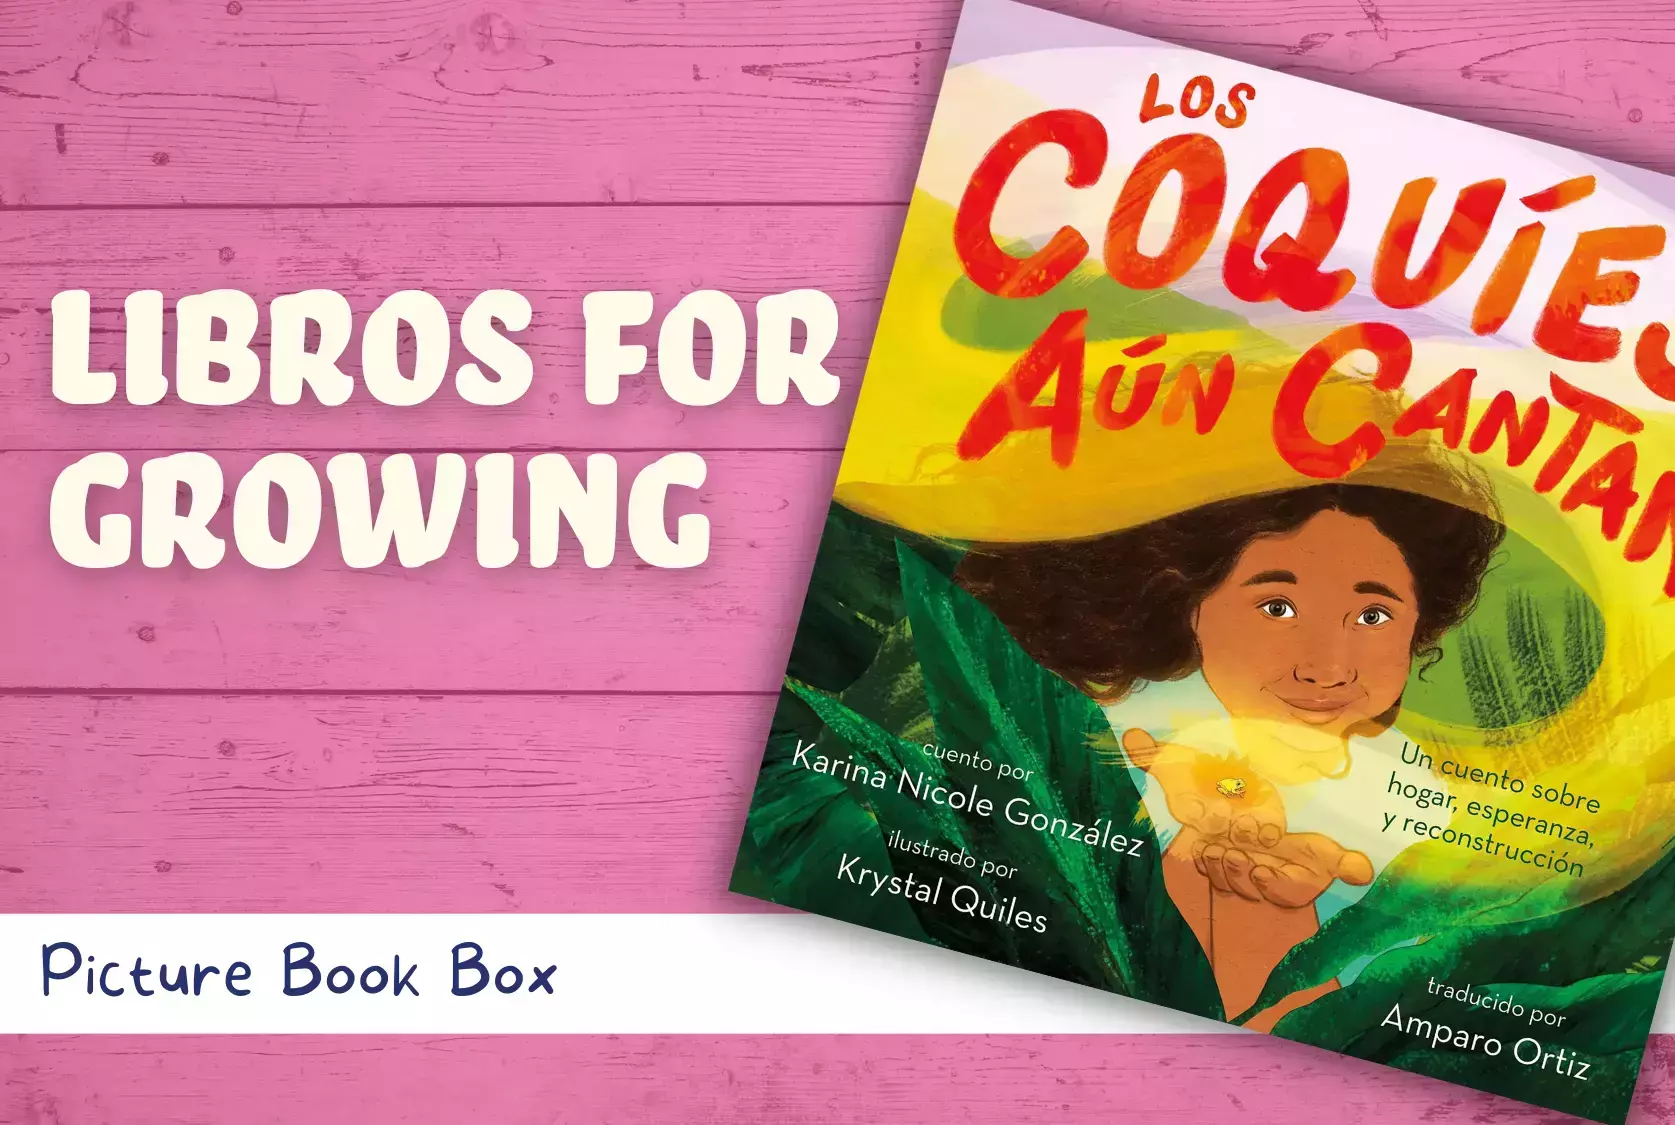 Libros for growing hero